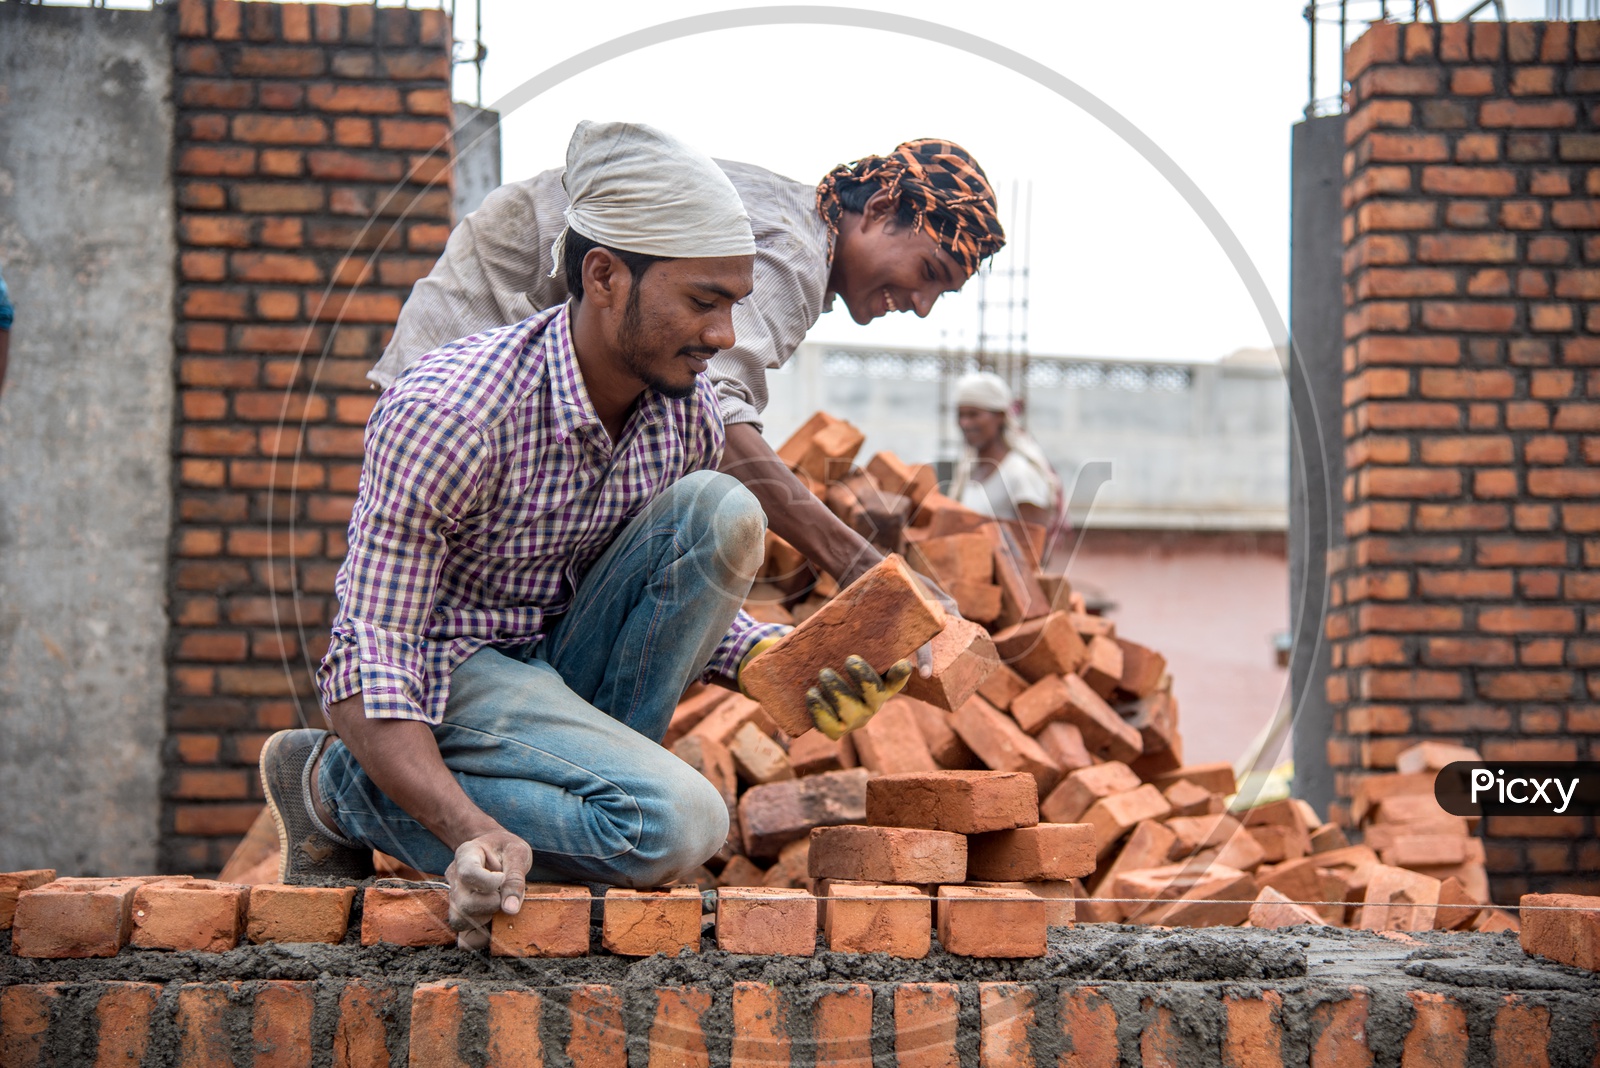 Indian Rural Construction Workers Working Developing a Site By  Cement And Bricks In Hands